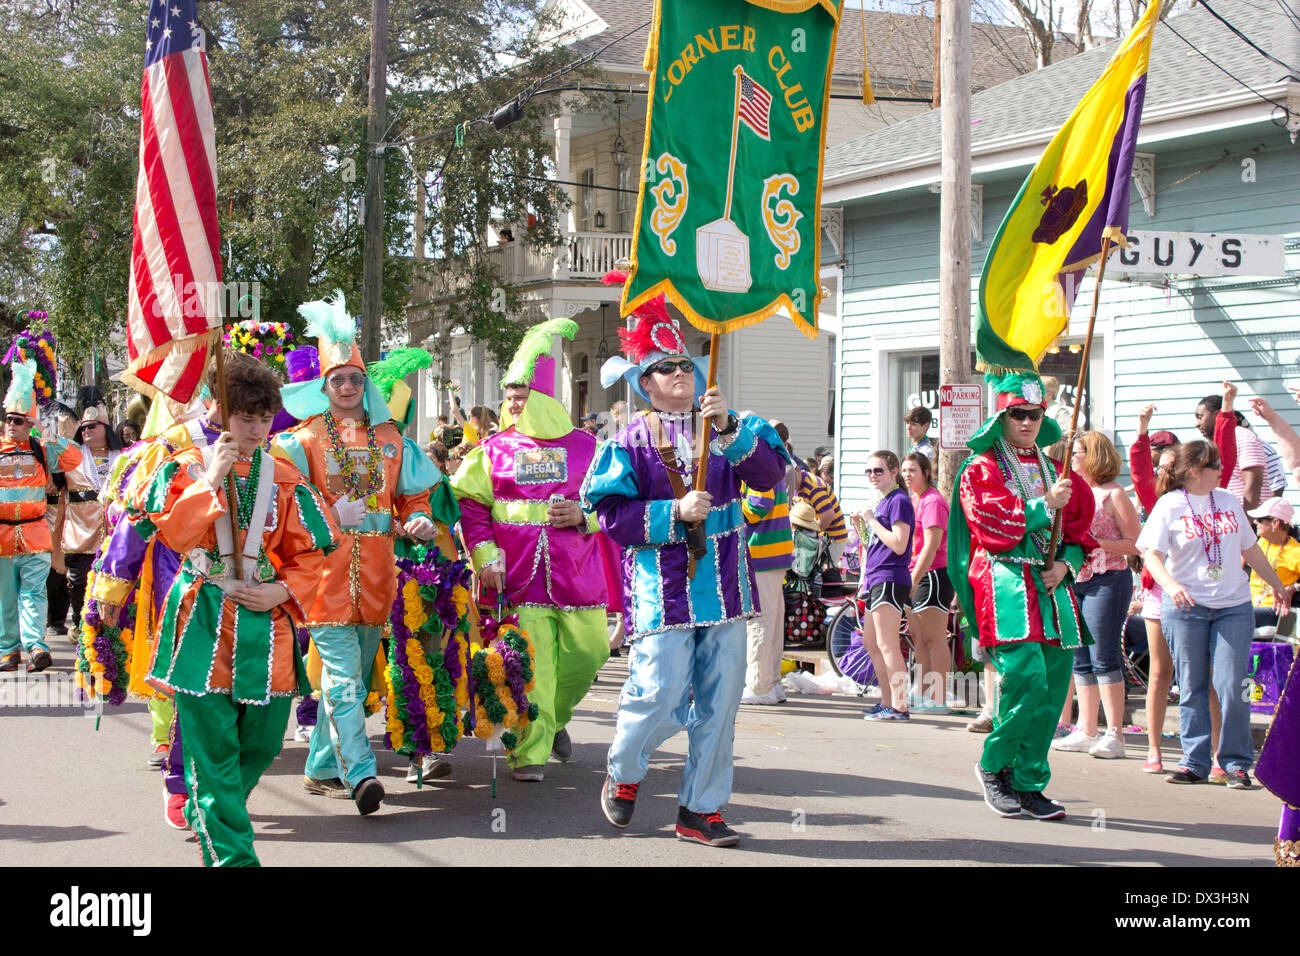 Corner Club marching group in costumes with flags.  Mardi Gras season New Orleans. Stock Photo